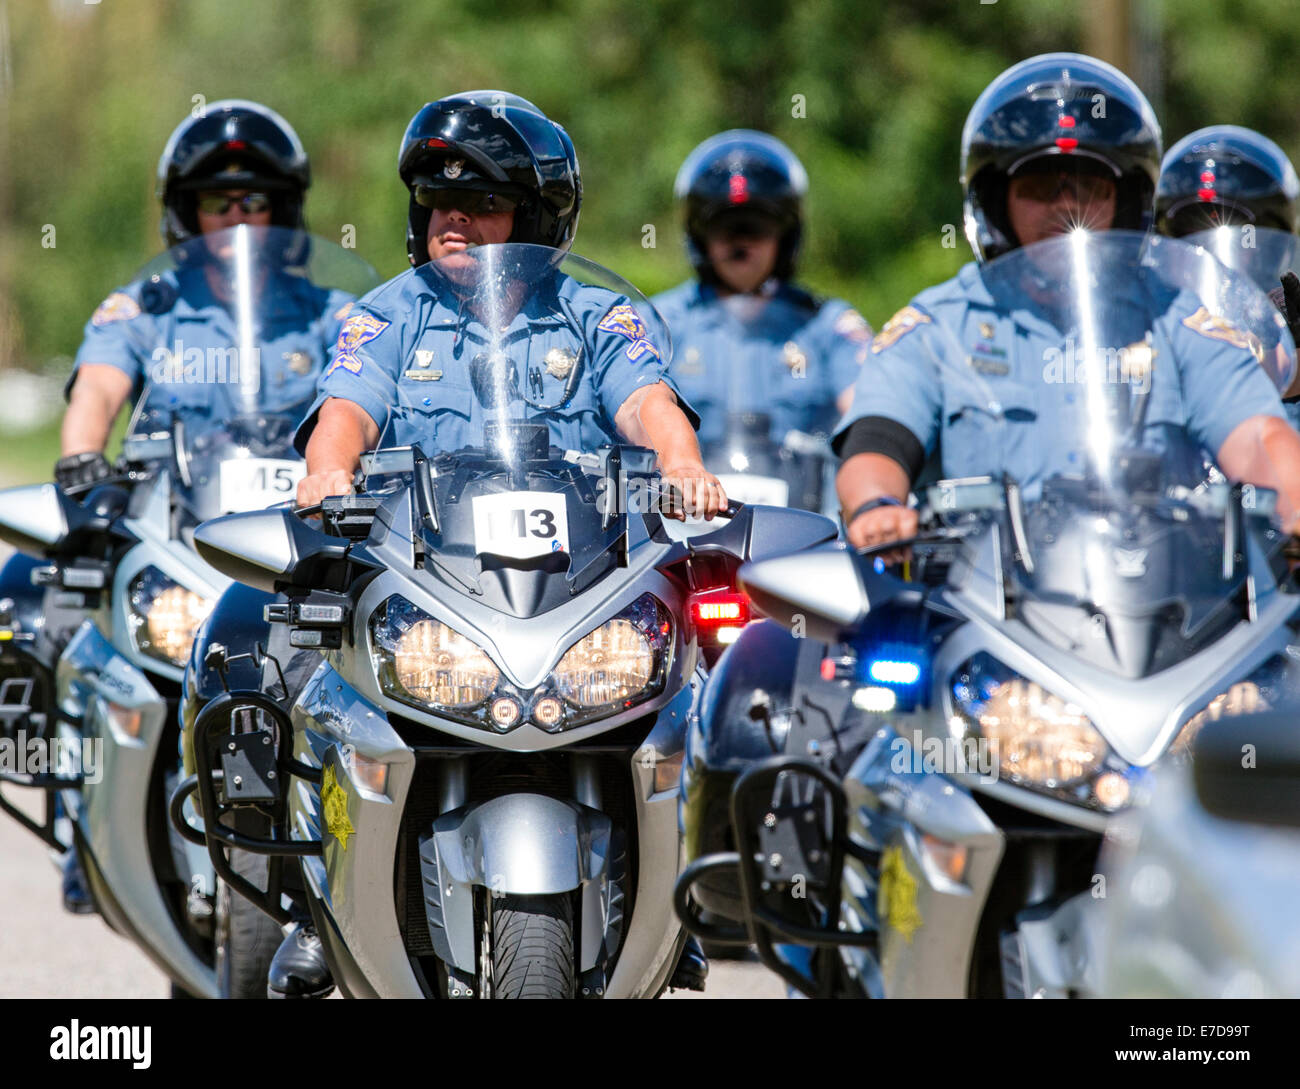 Colorado State Police motorcycles, USA Pro Challenge bike race, Stage 3, central Colorado, USA Stock Photo